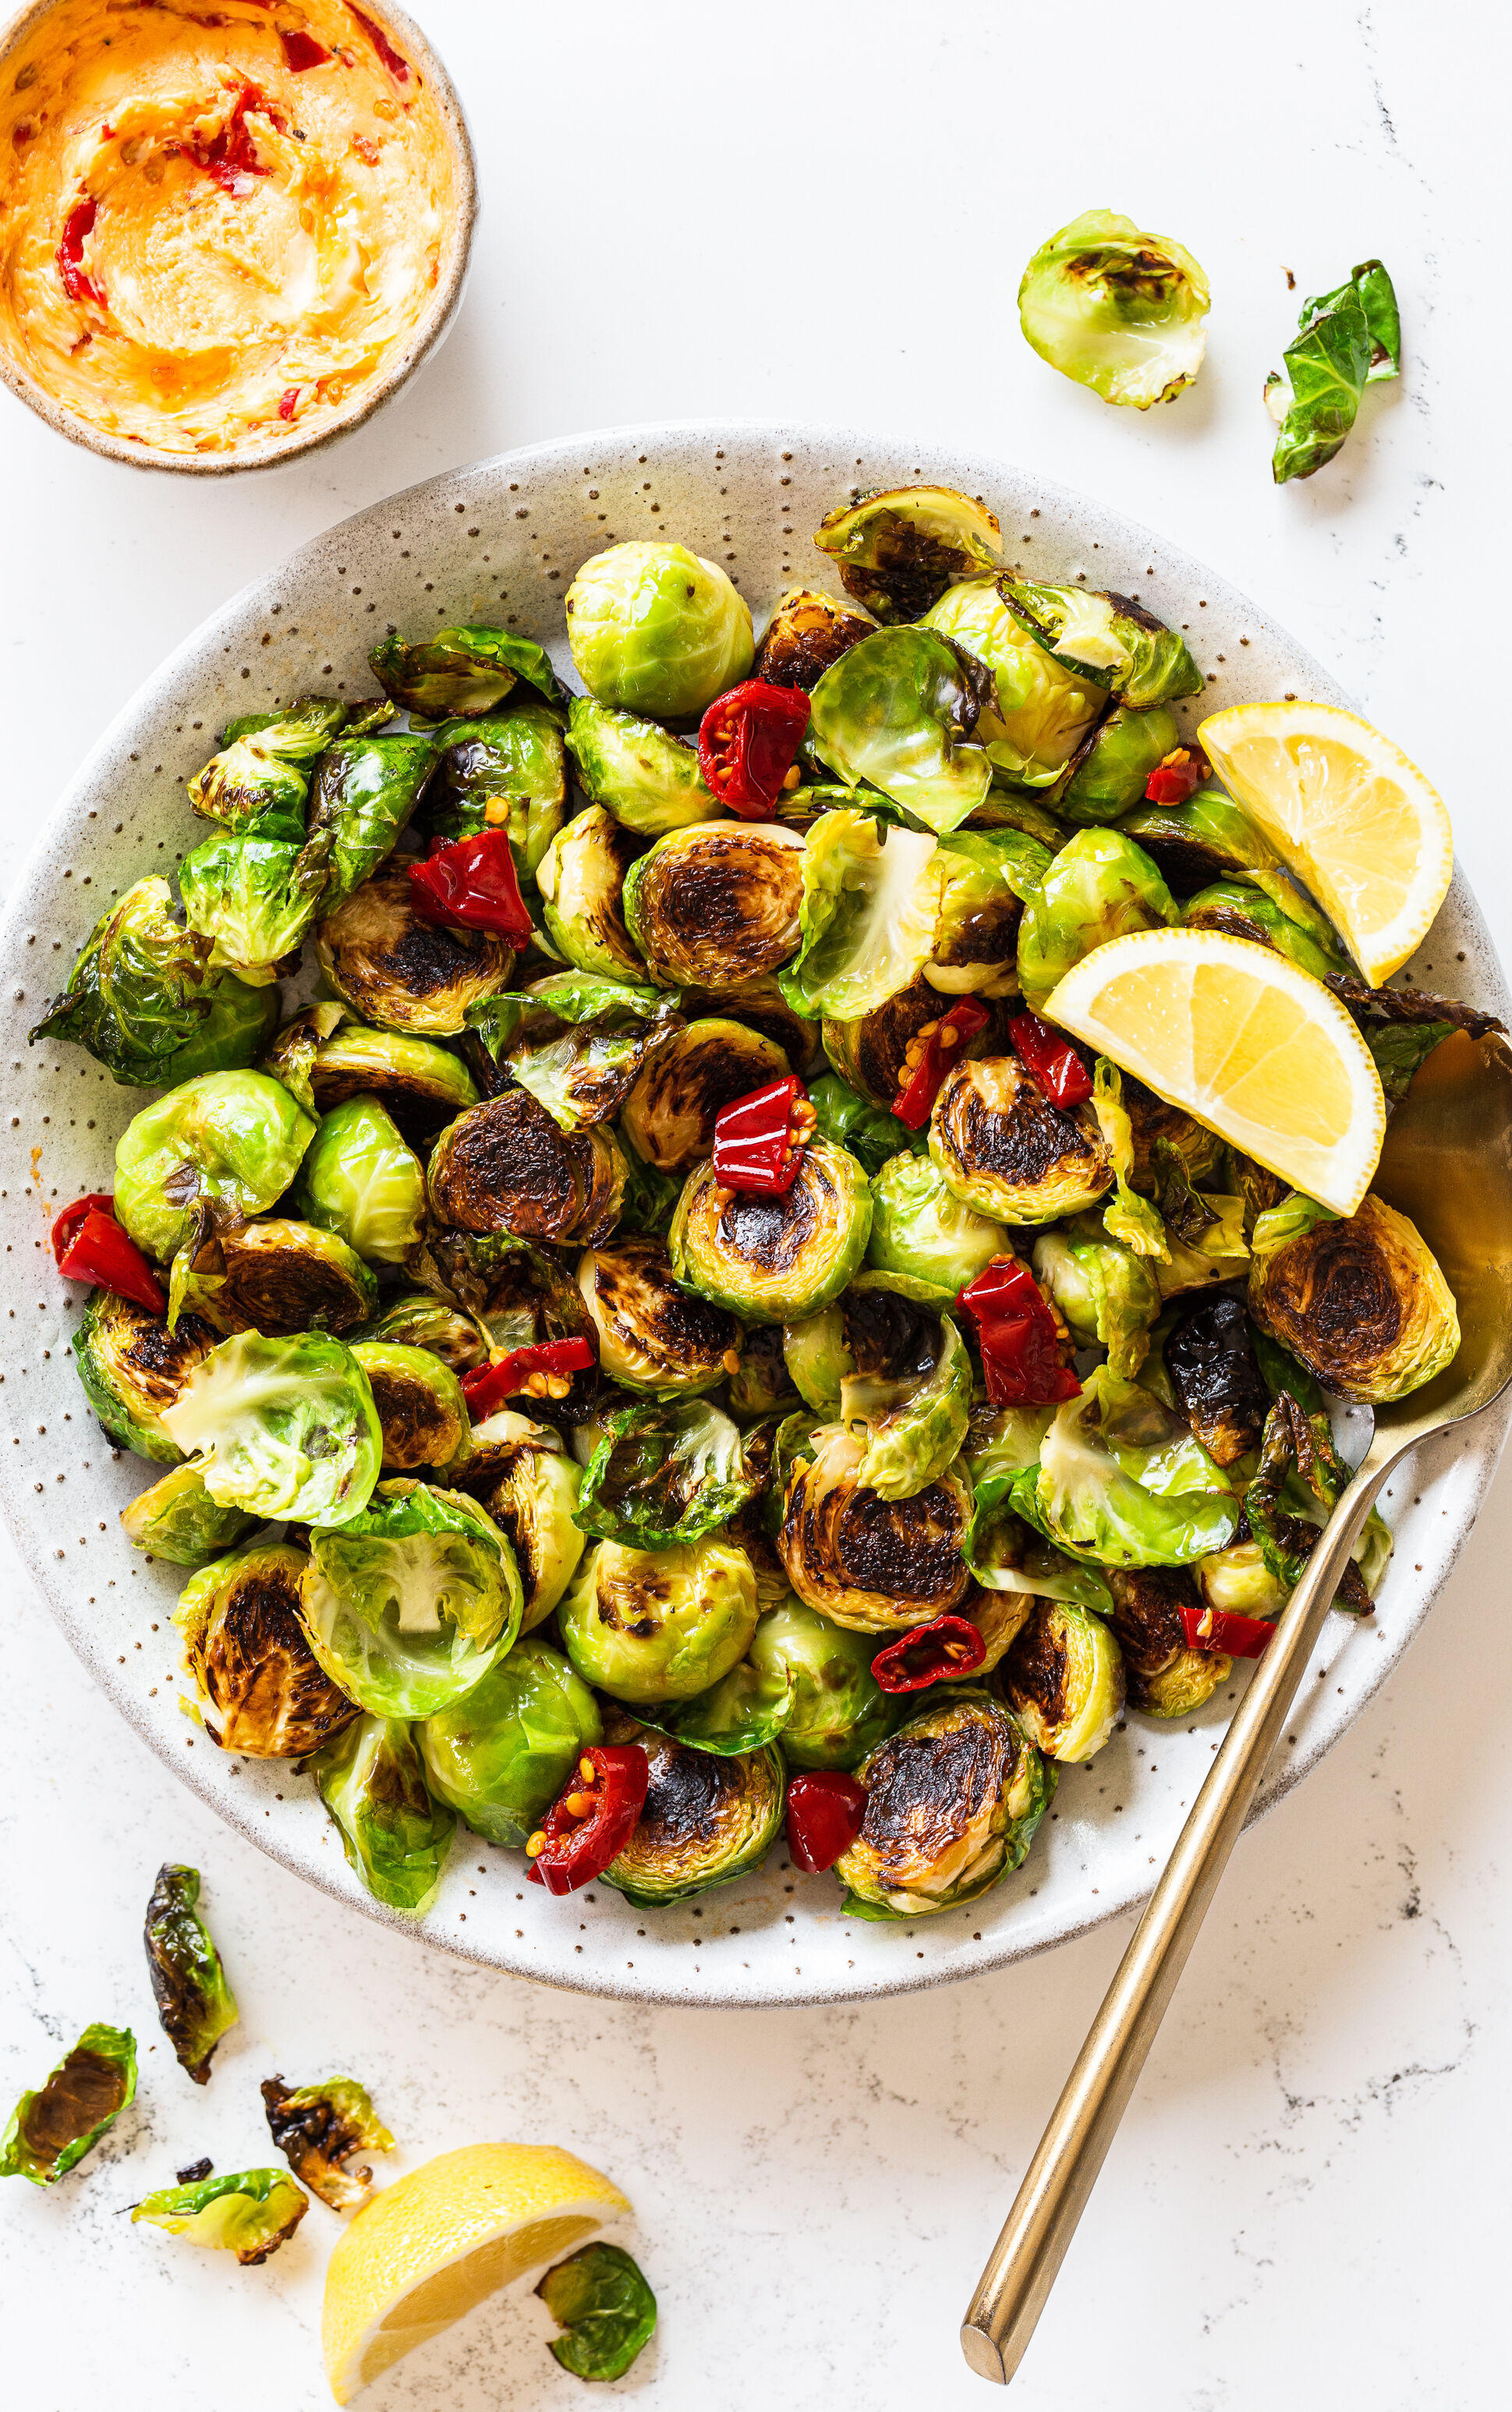 Calabrian Chili Butter Roasted Brussels Sprouts By Racheldolfi Quick Easy Recipe The Feedfeed